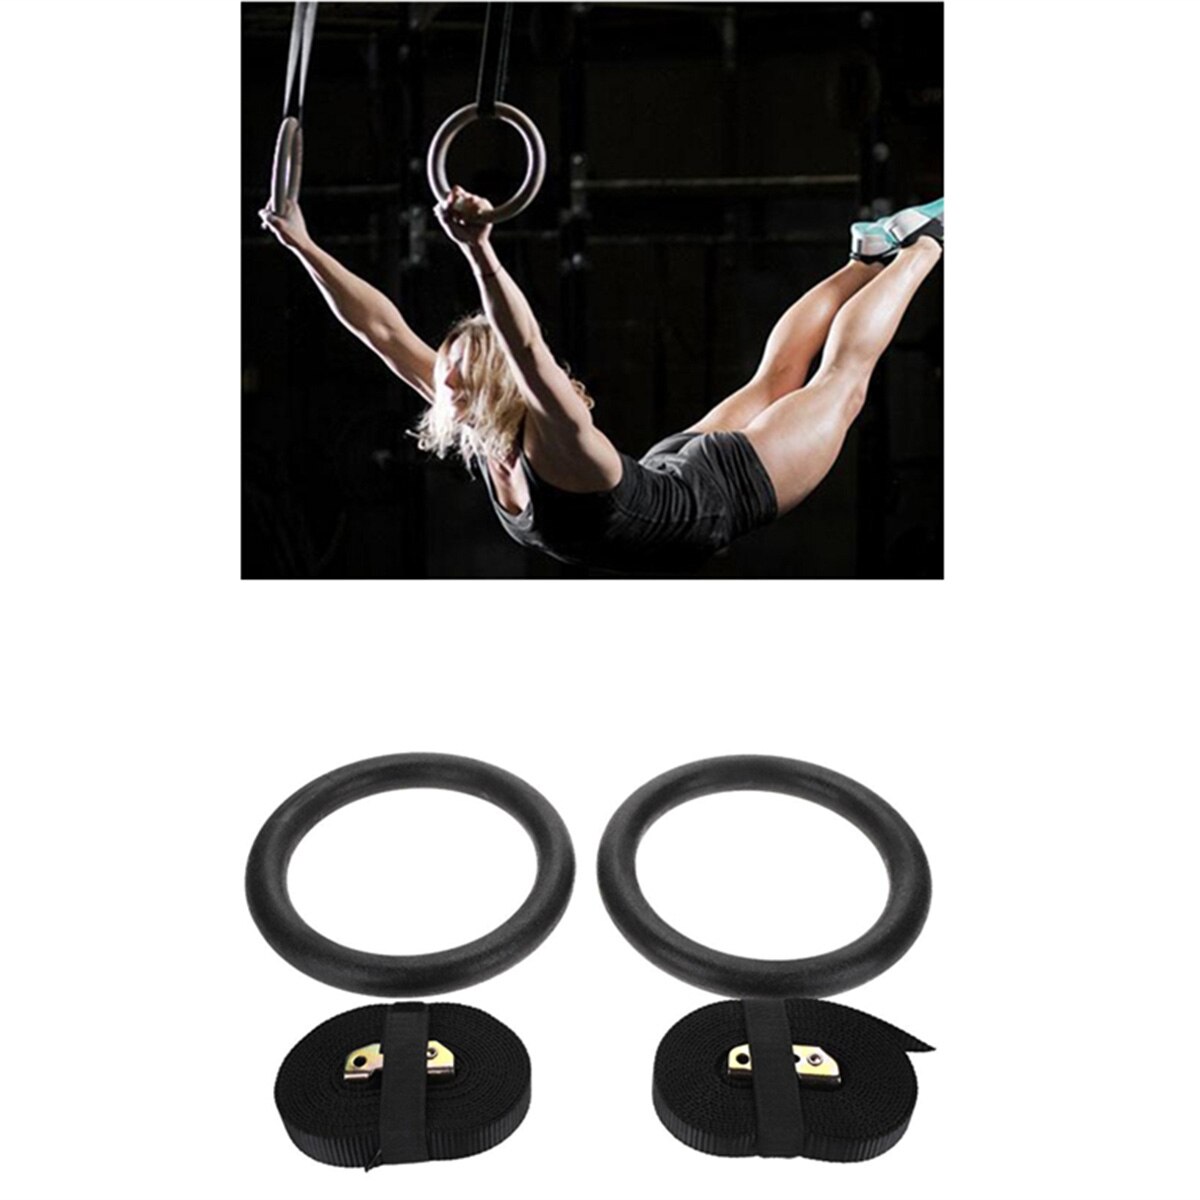 Adjustable Gymnastic Gym Rings Black Fitness Muscle Fitness Rings Strength Training Straps Hoop Fitness Equipment